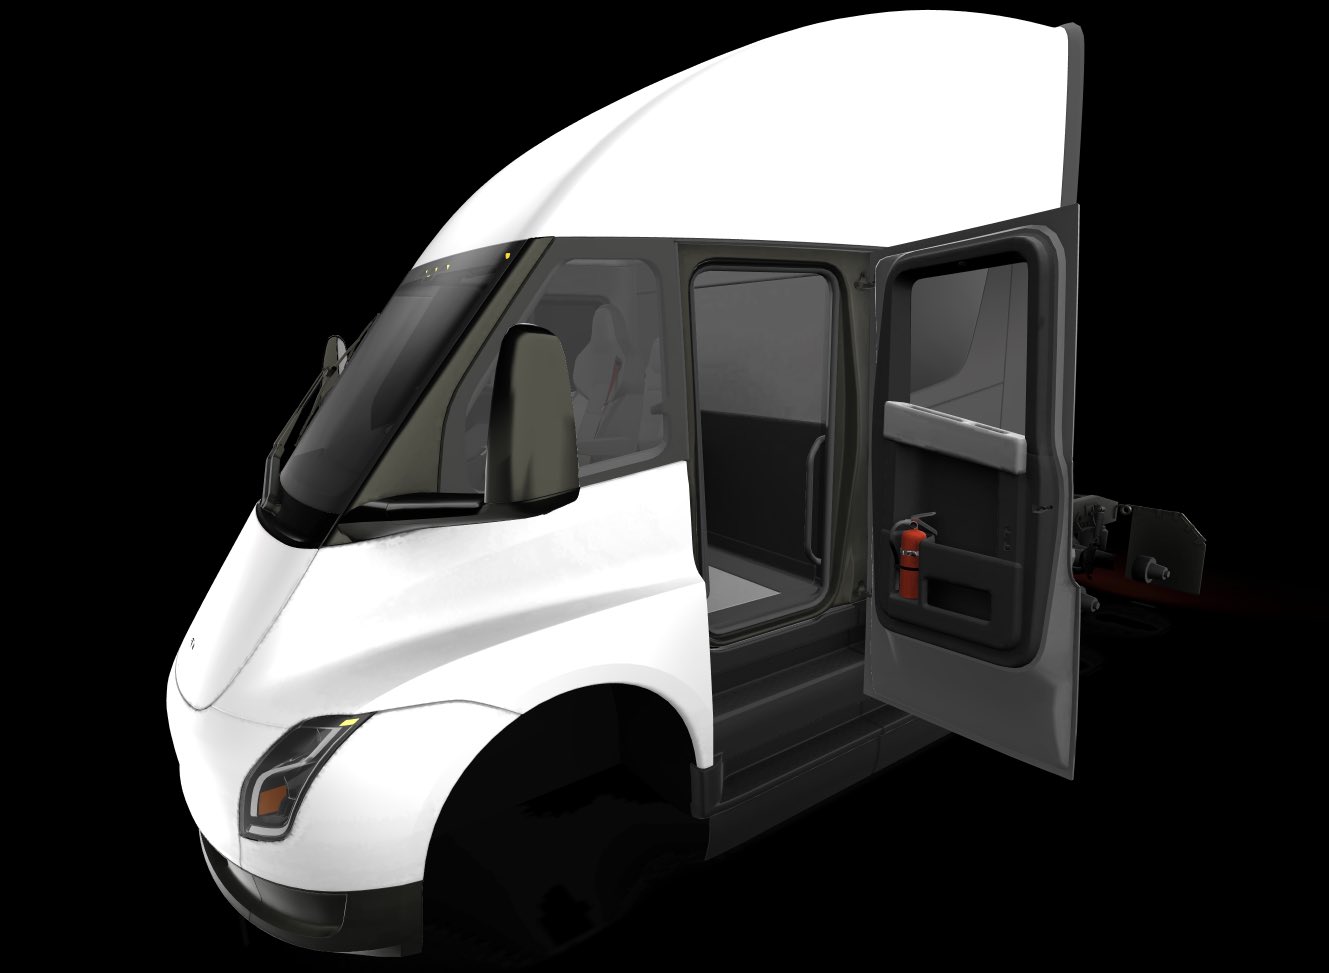 Tesla has added 3D models of the Tesla Semi to its app